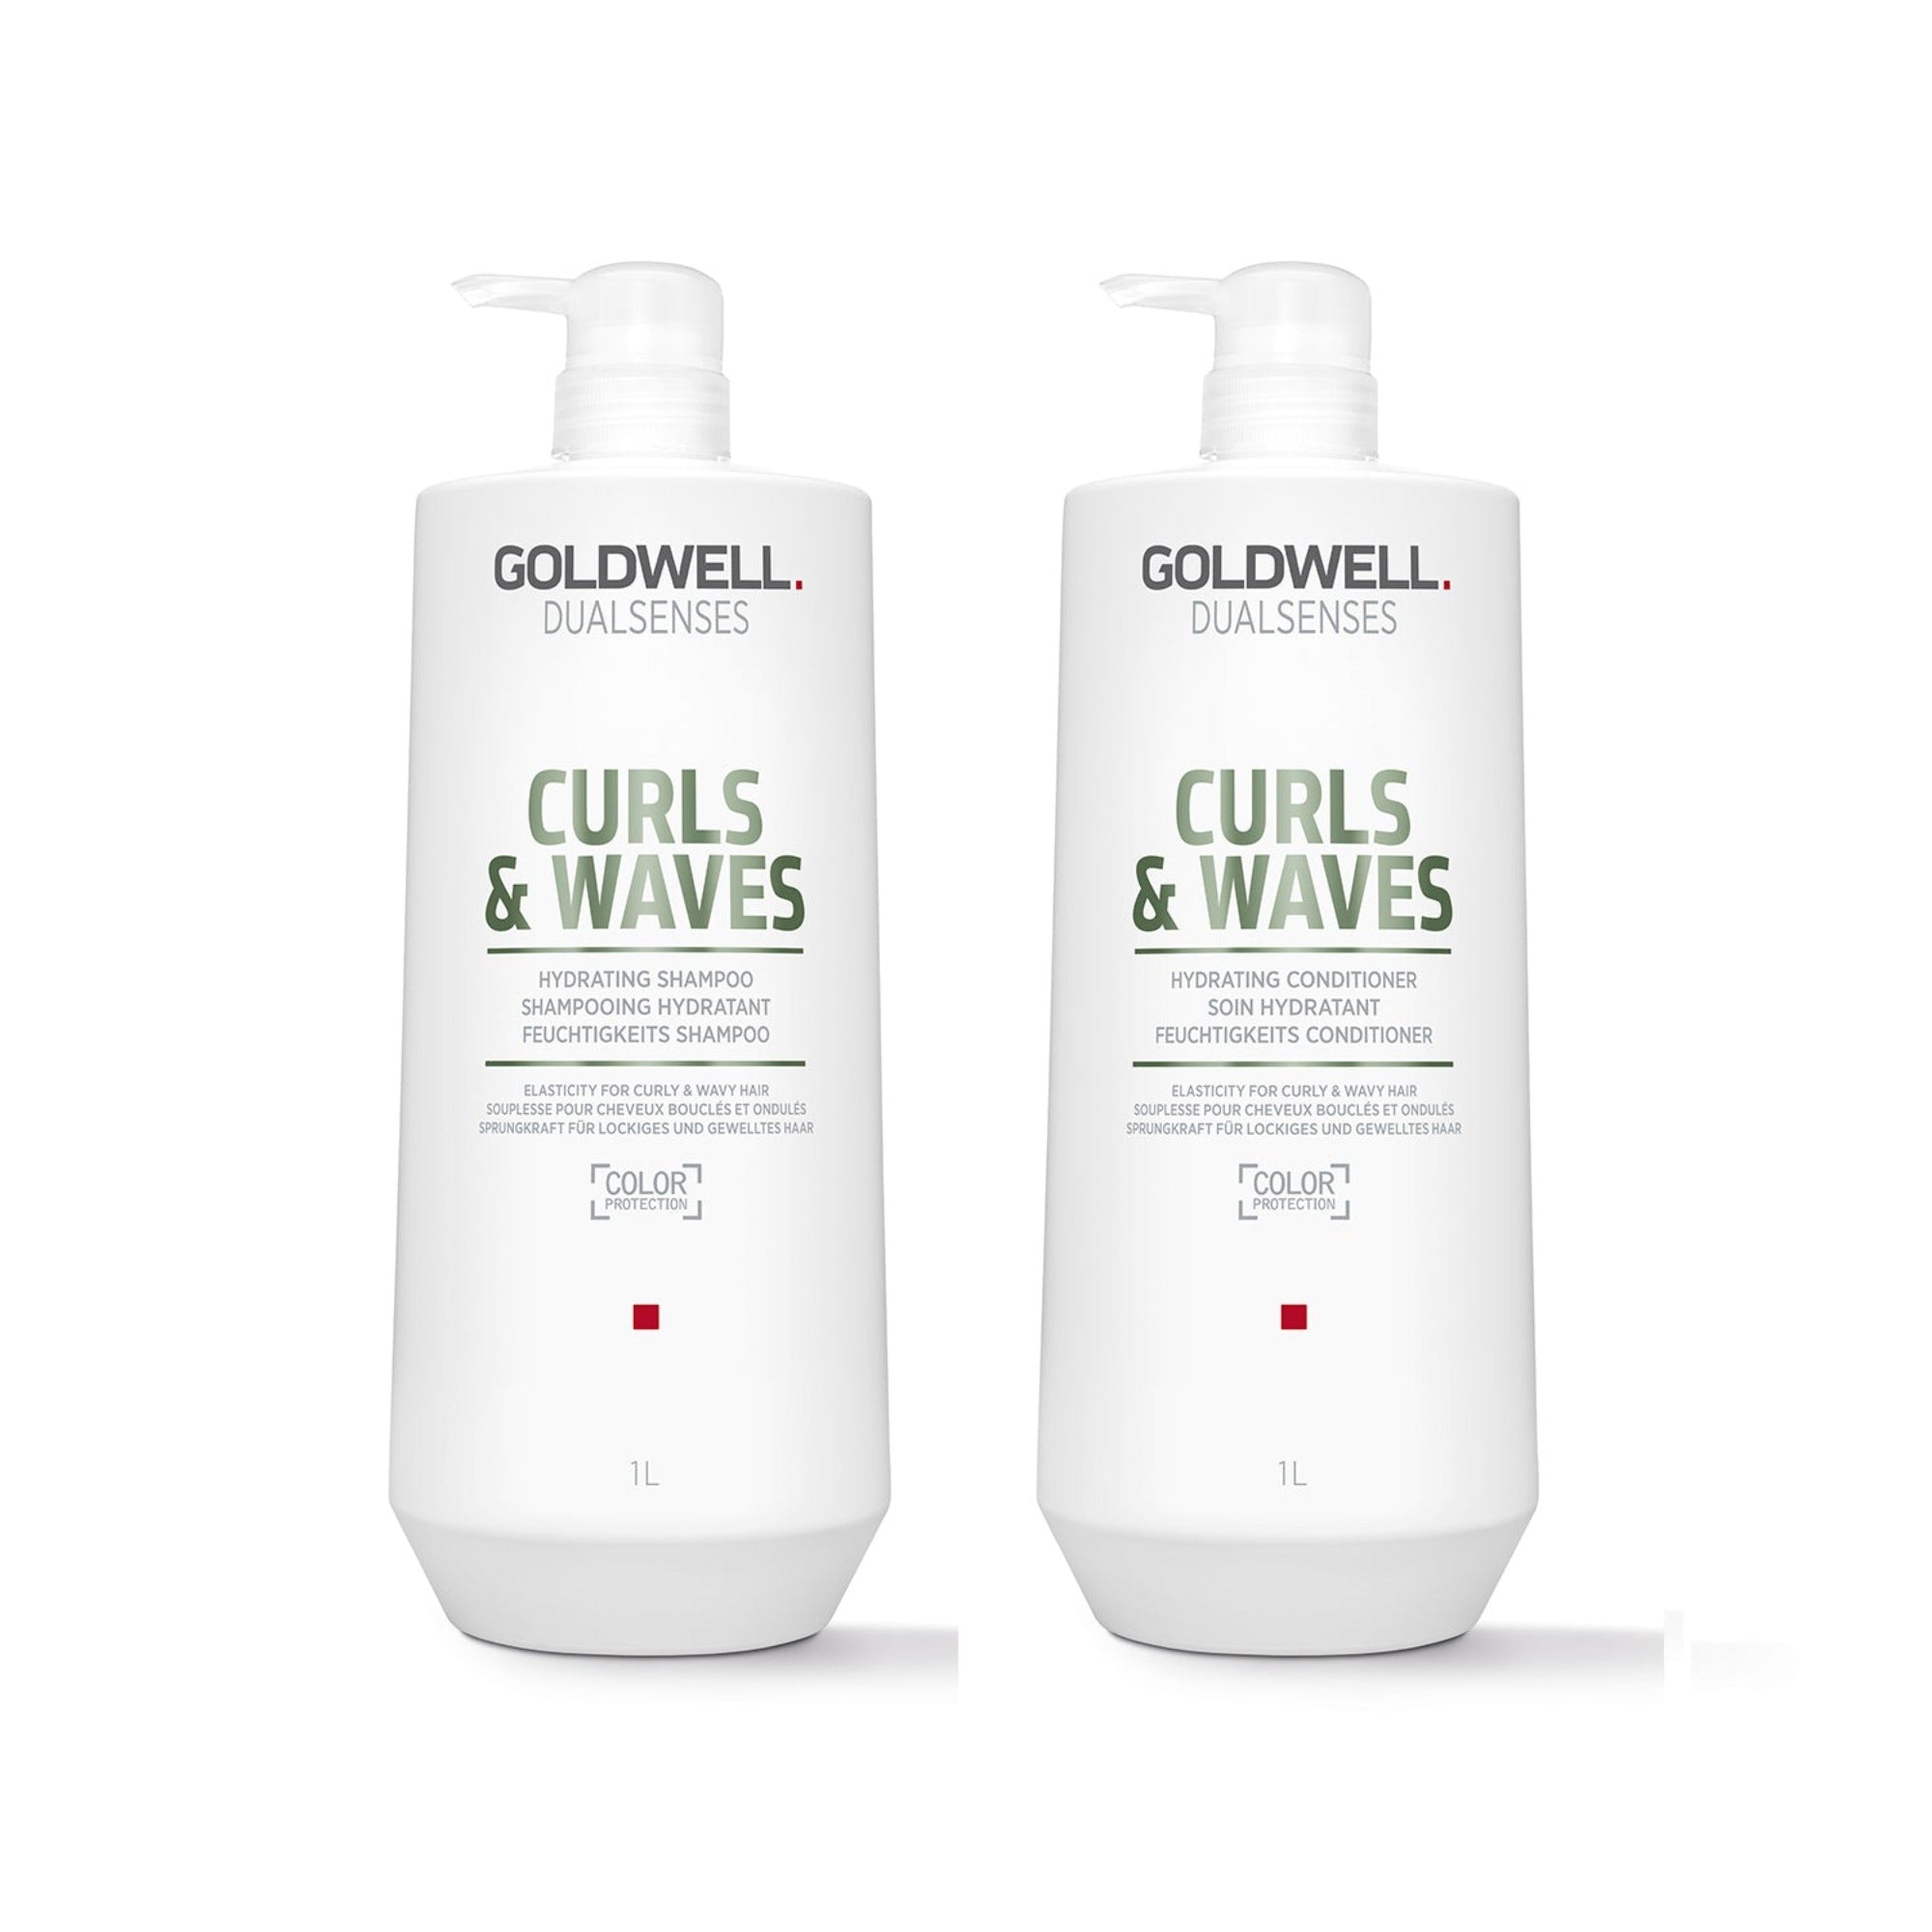 Goldwell Curls & Waves Shampoo and Conditioner Liter Duo ($85 Value) / 33.8OZ